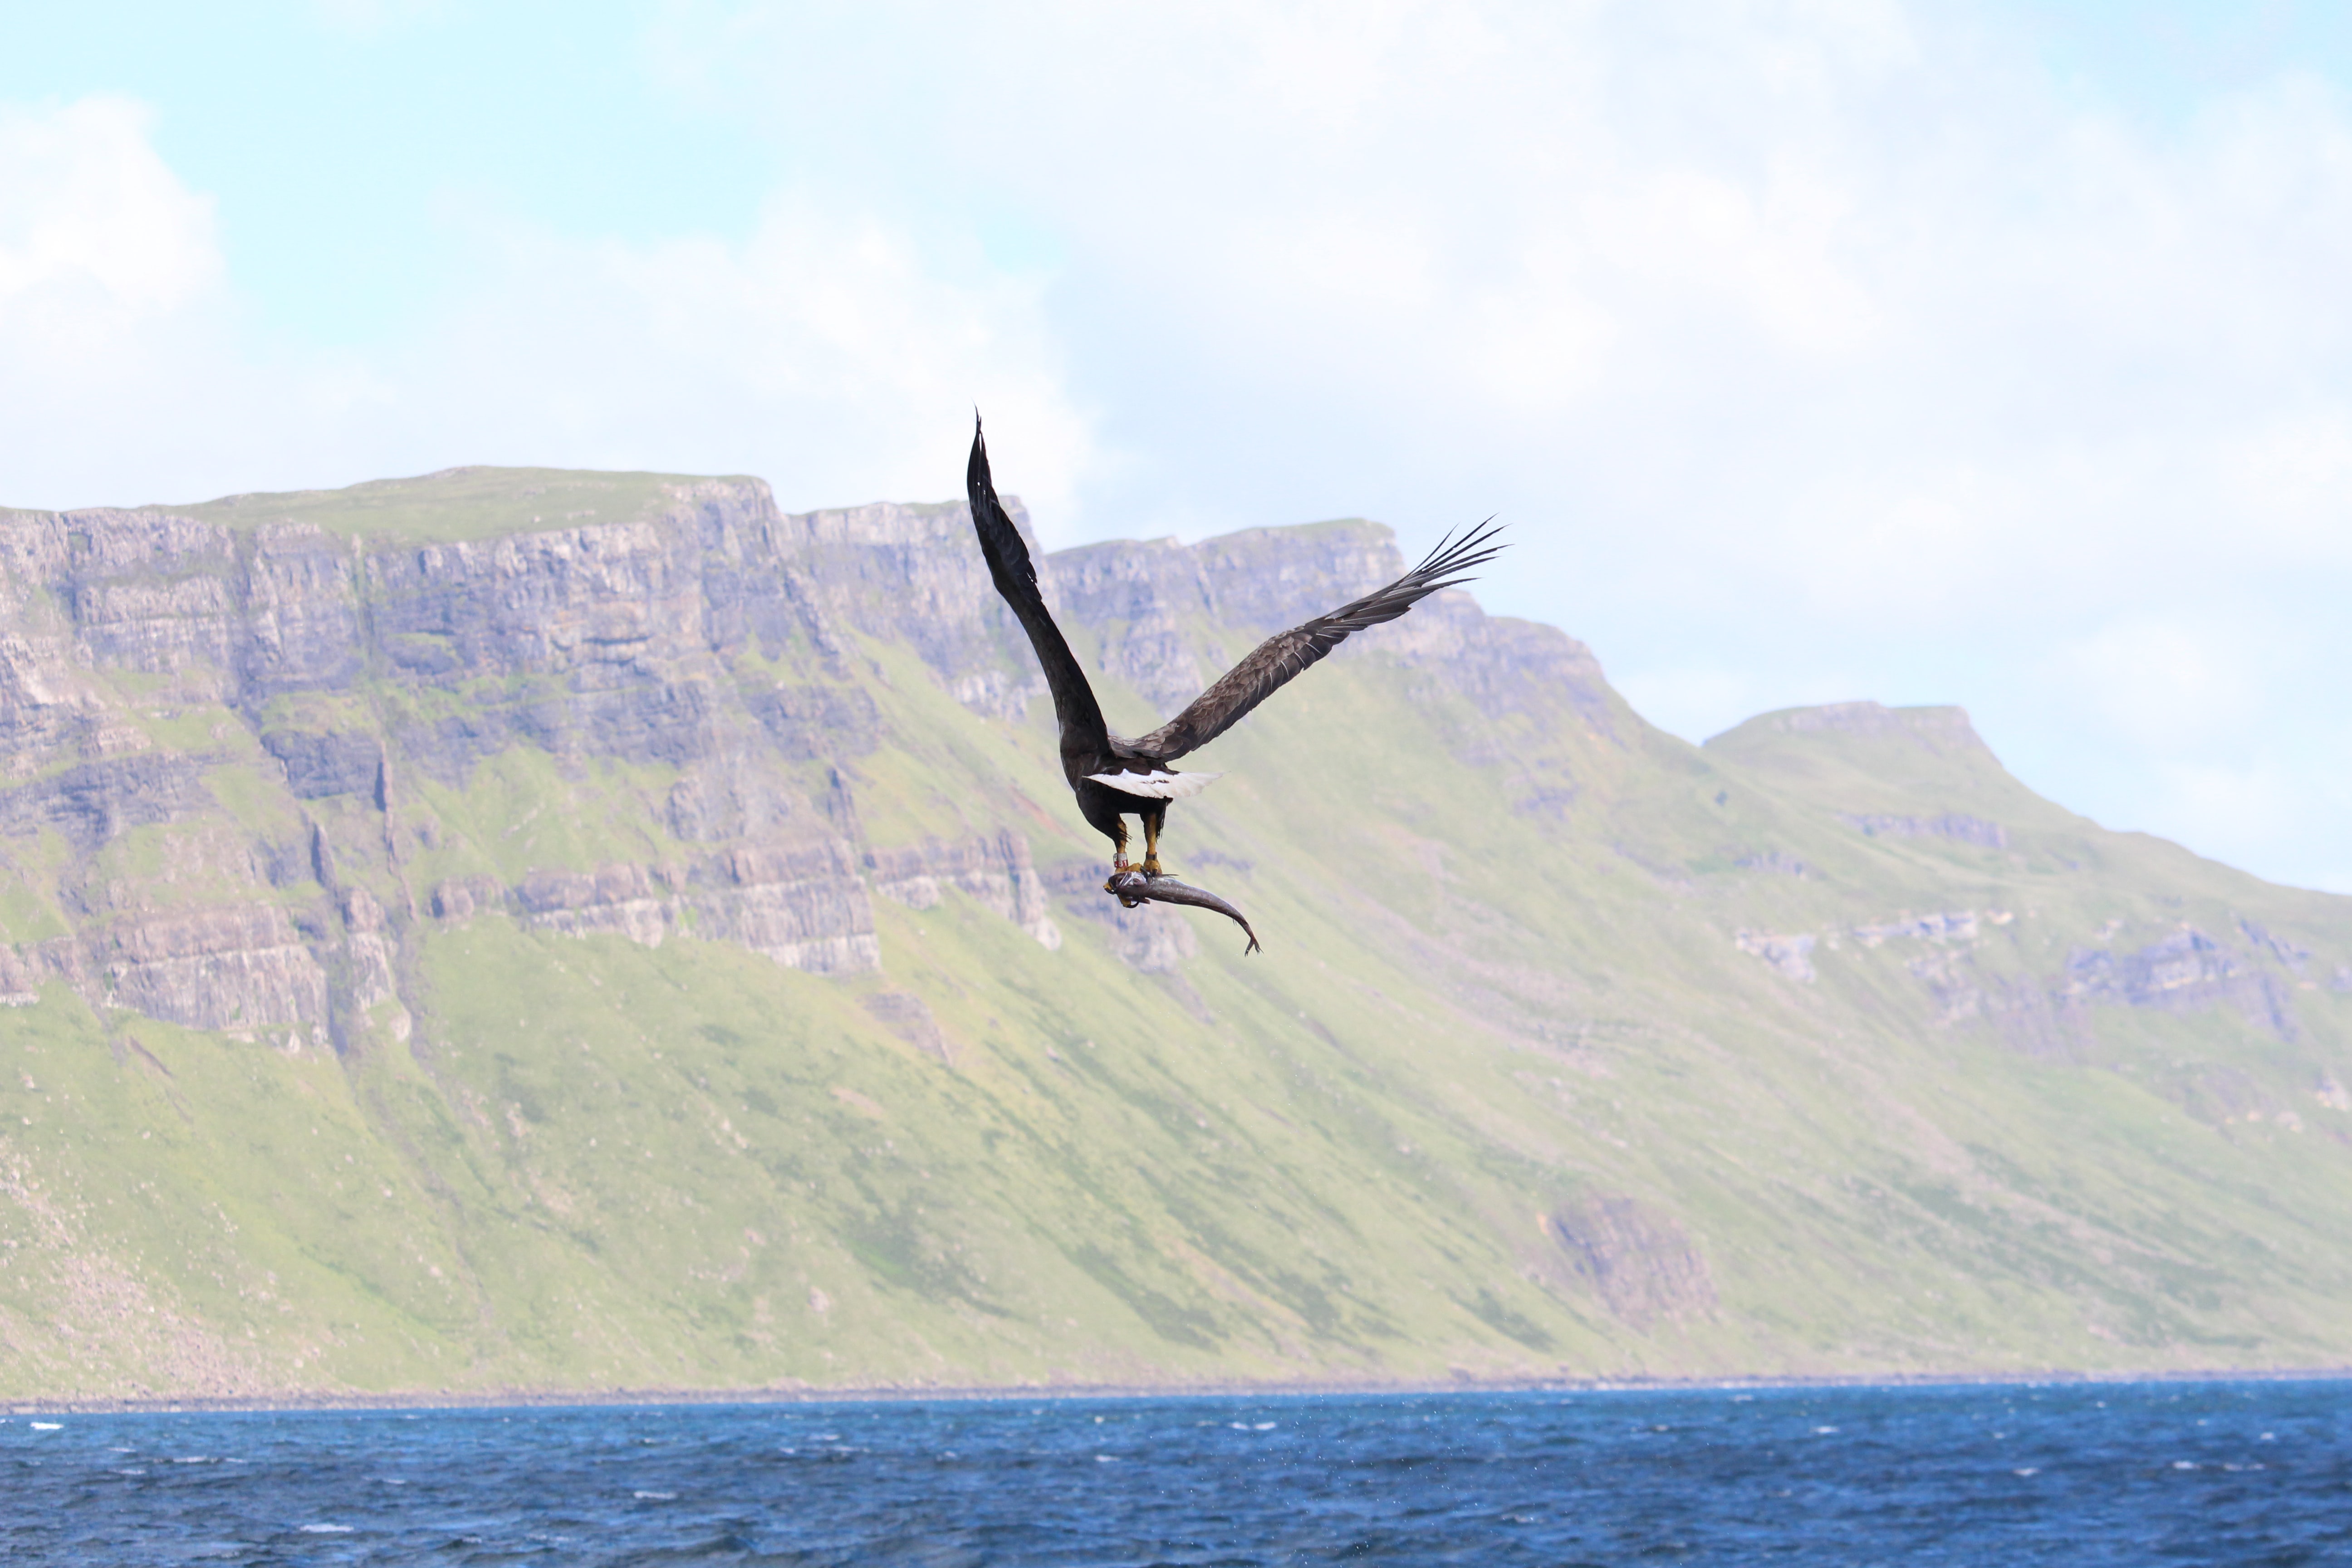 Sea eagle flying over blue sea with green cliffs behind